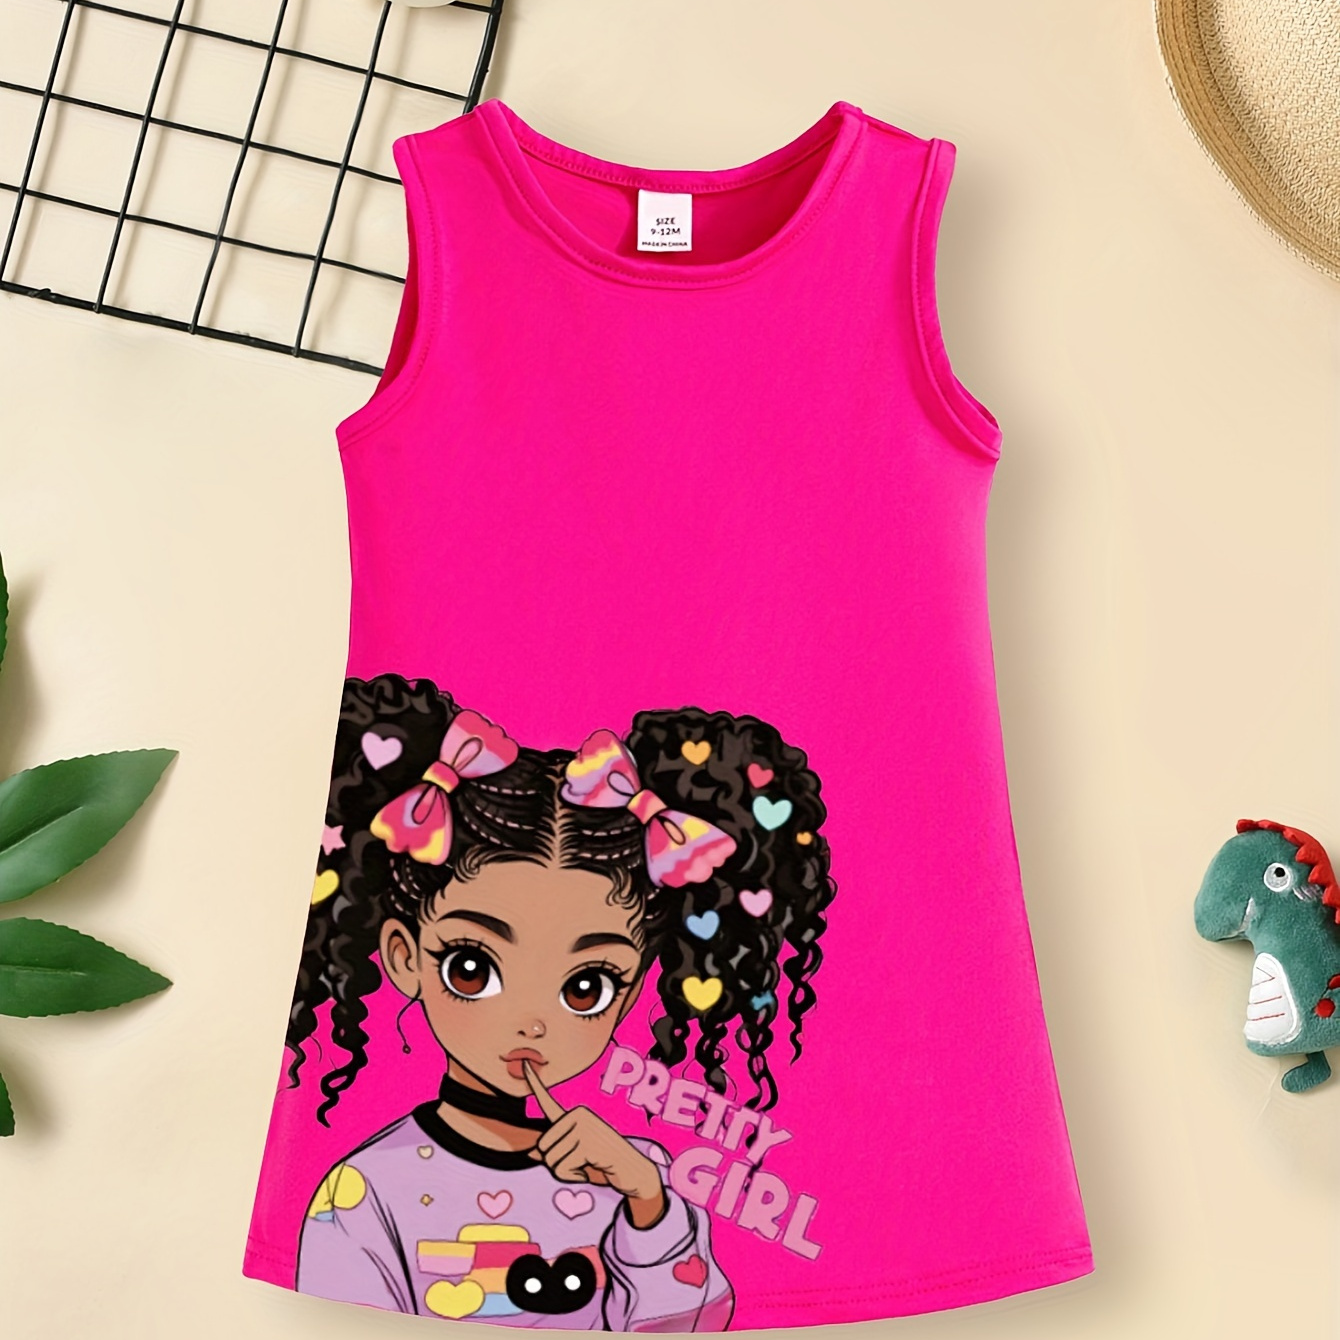 

Baby's Cartoon Pretty Girl Print Casual Sleeveless Dress, Infant & Toddler Girl's Clothing For Summer/spring, As Gift